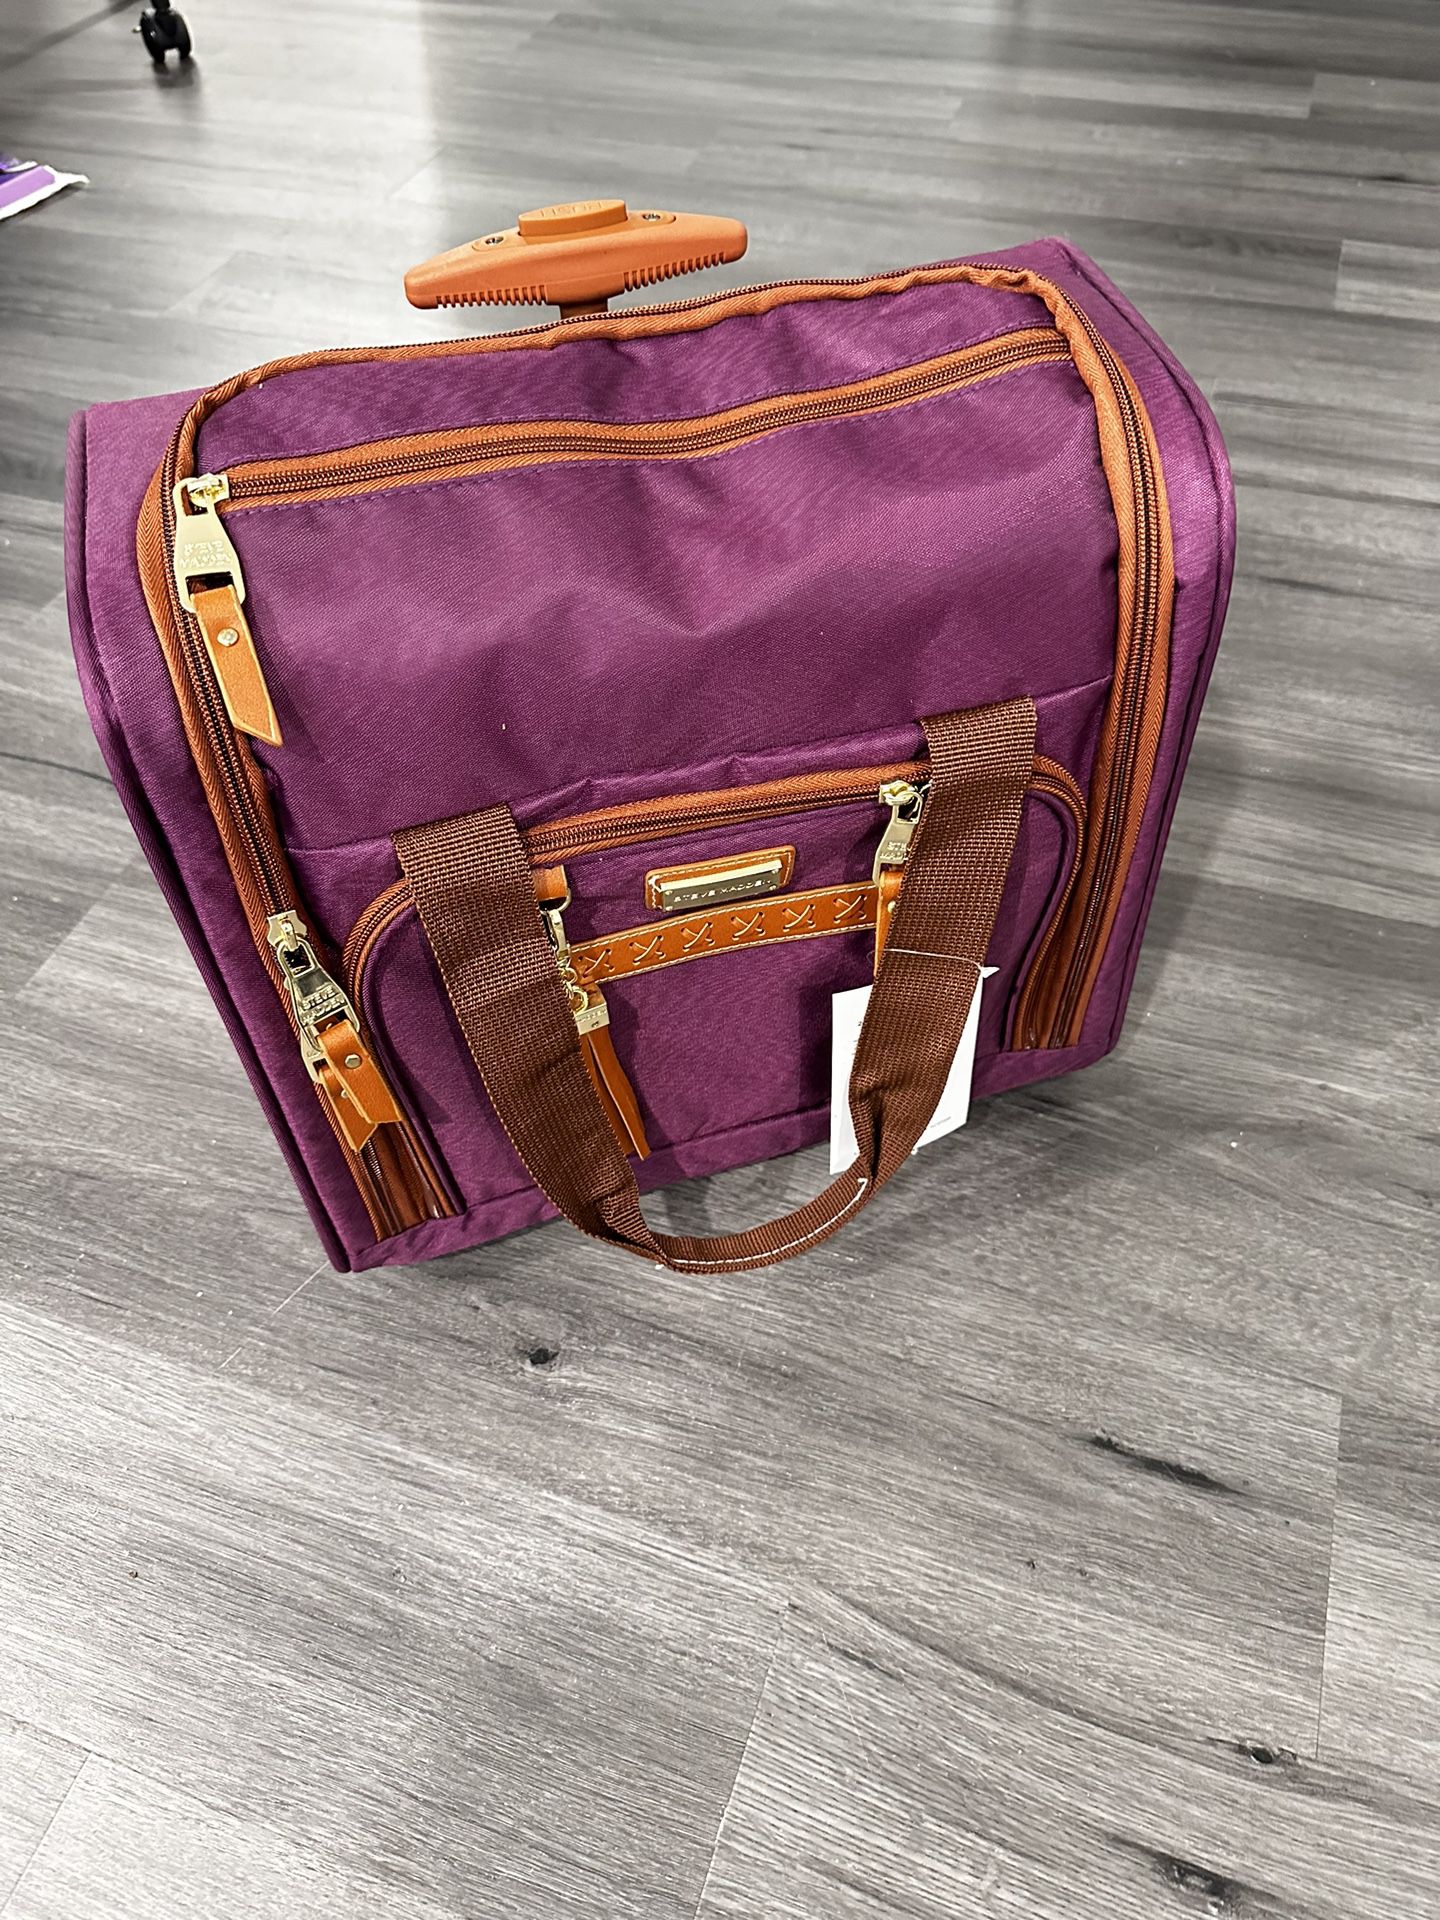 Steve Madden NWT Multi Speedy Travel Bag Hard To Find for Sale in Trout  Valley, IL - OfferUp